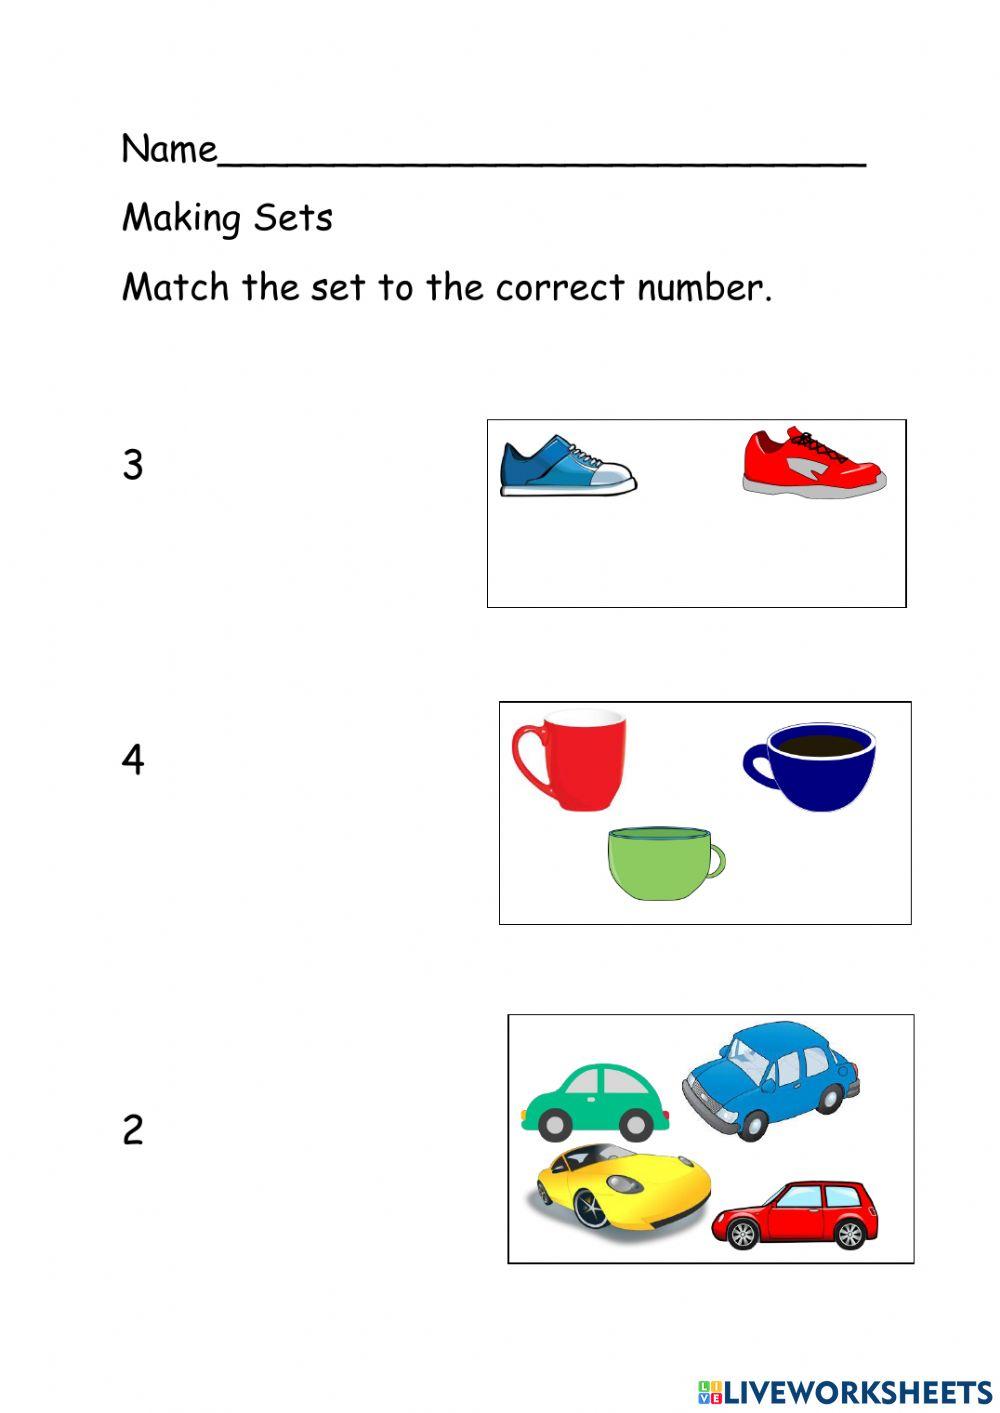 Match set to number